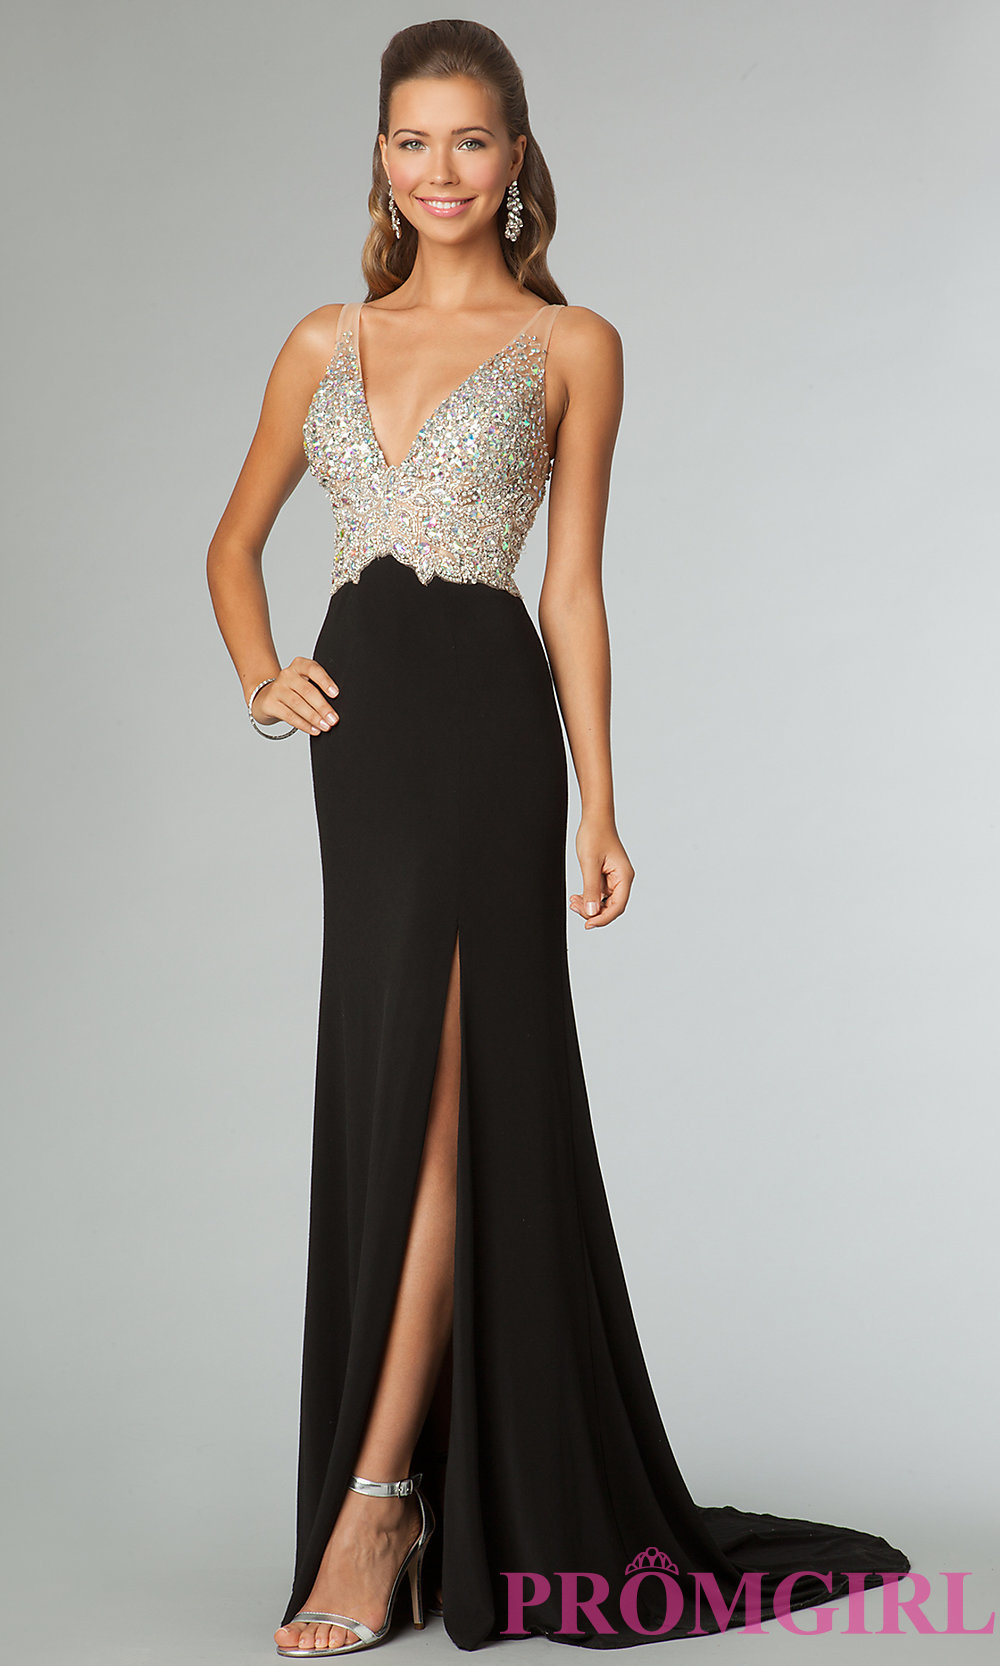 Black Dresses For Formal & Different Occasions